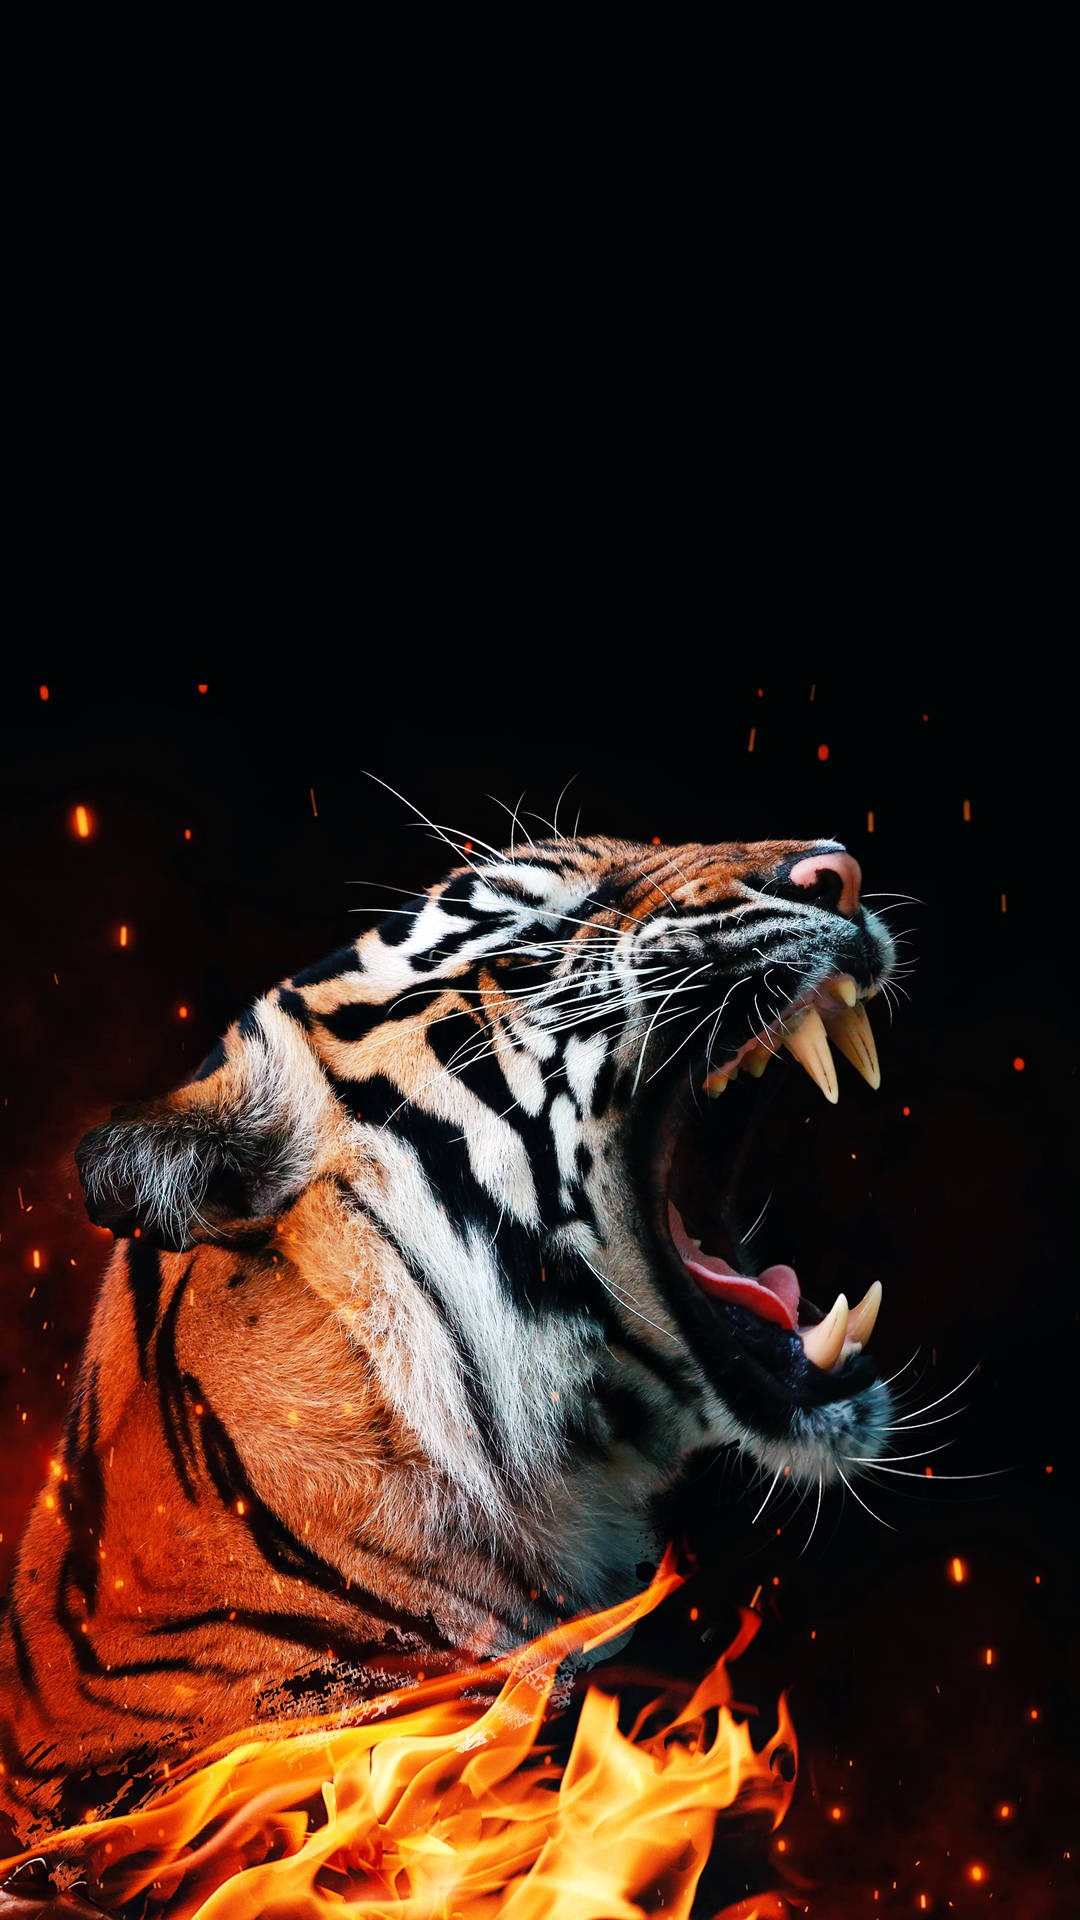 Download Cool Tiger Photo In Fire Wallpaper